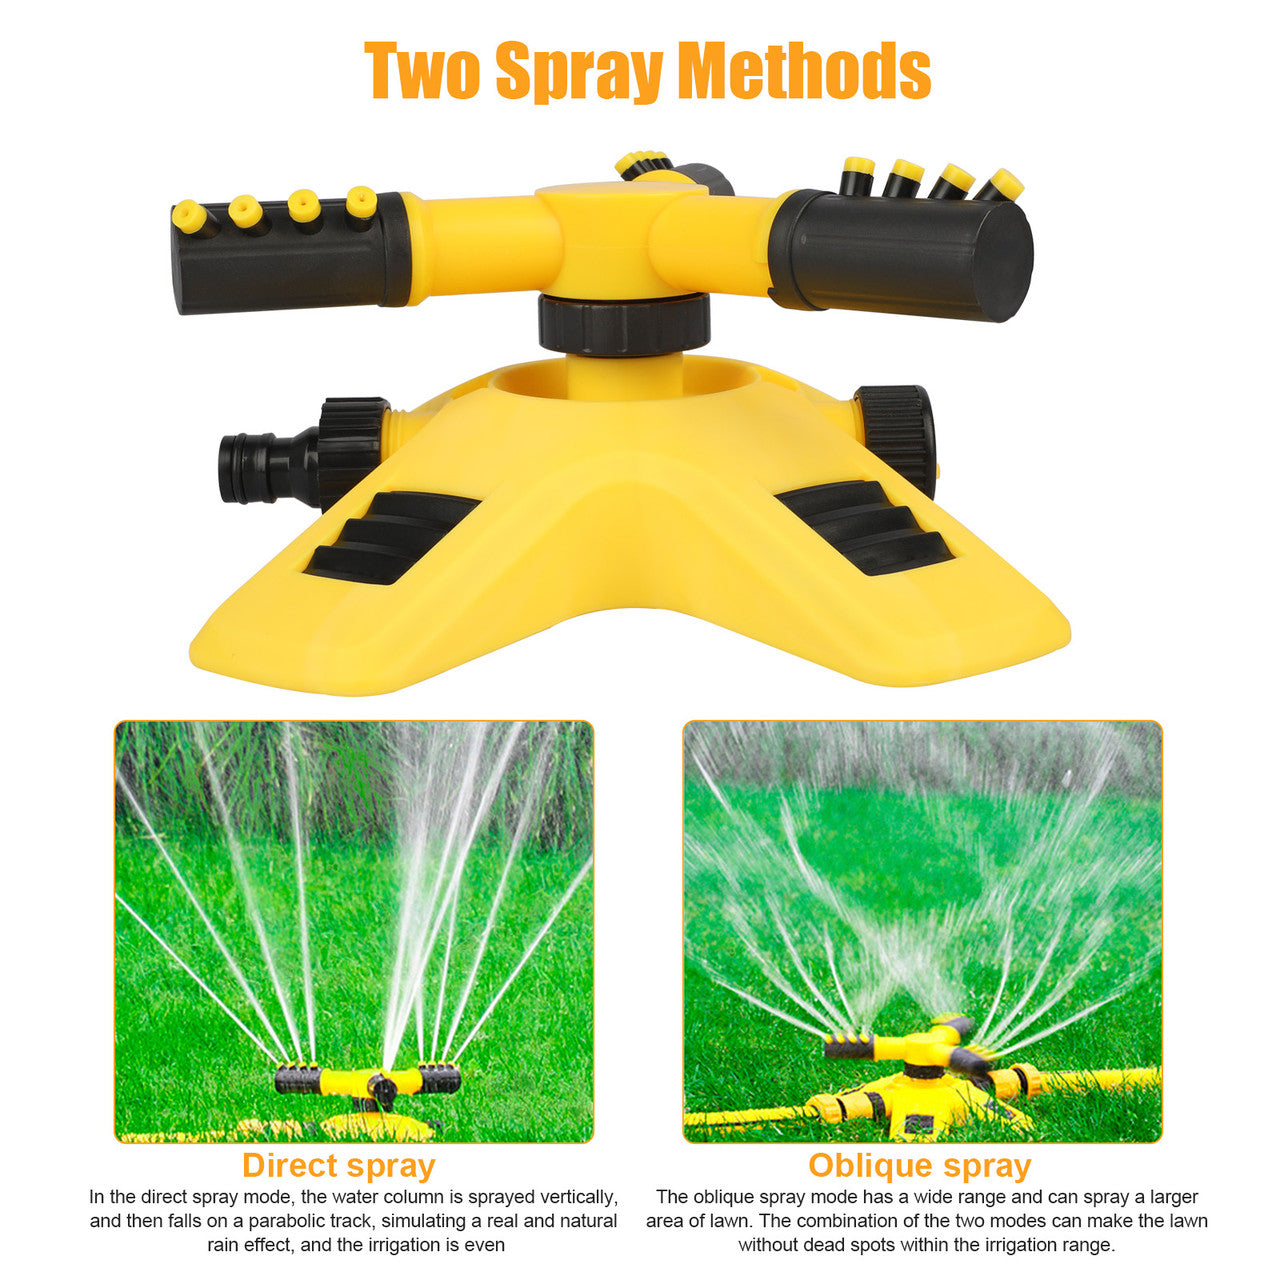 360° Auto Rotating Lawn Sprinklers with a Two-Spray Method and can be eaasily and quickly Installed